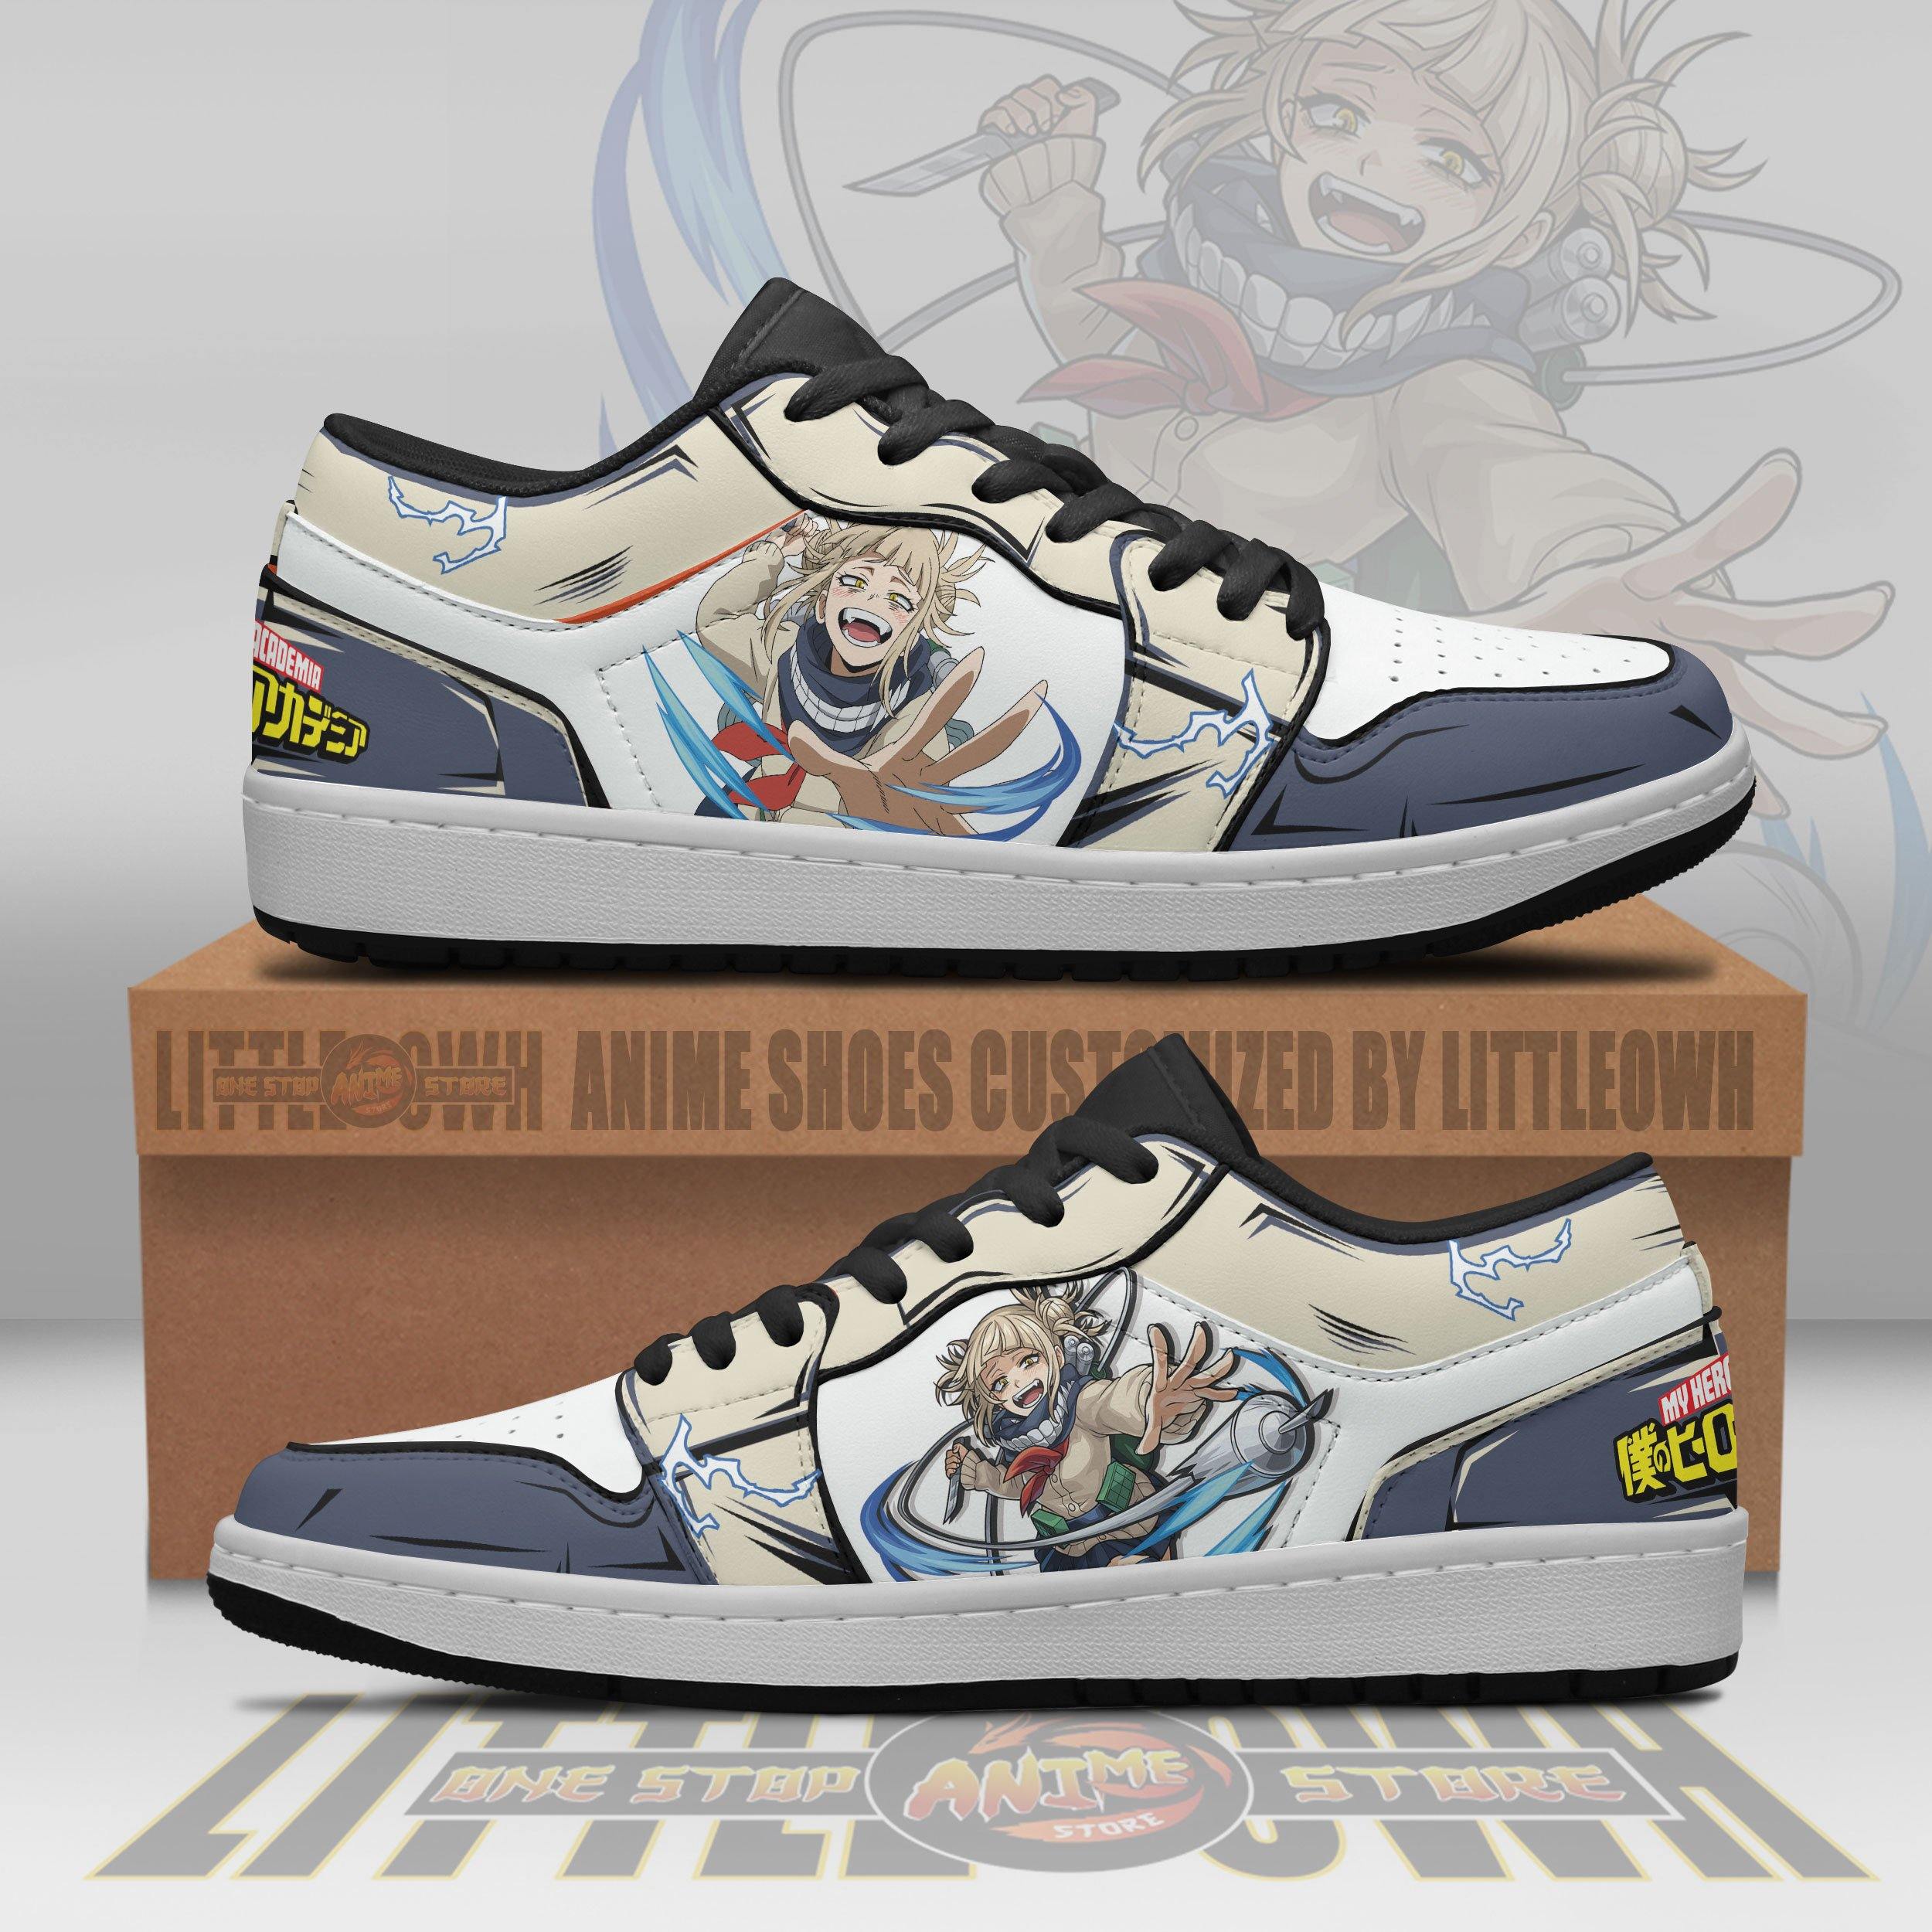 Himiko Toga My Hero Academia Shoes Anime Jd Low Top Sneakers ...